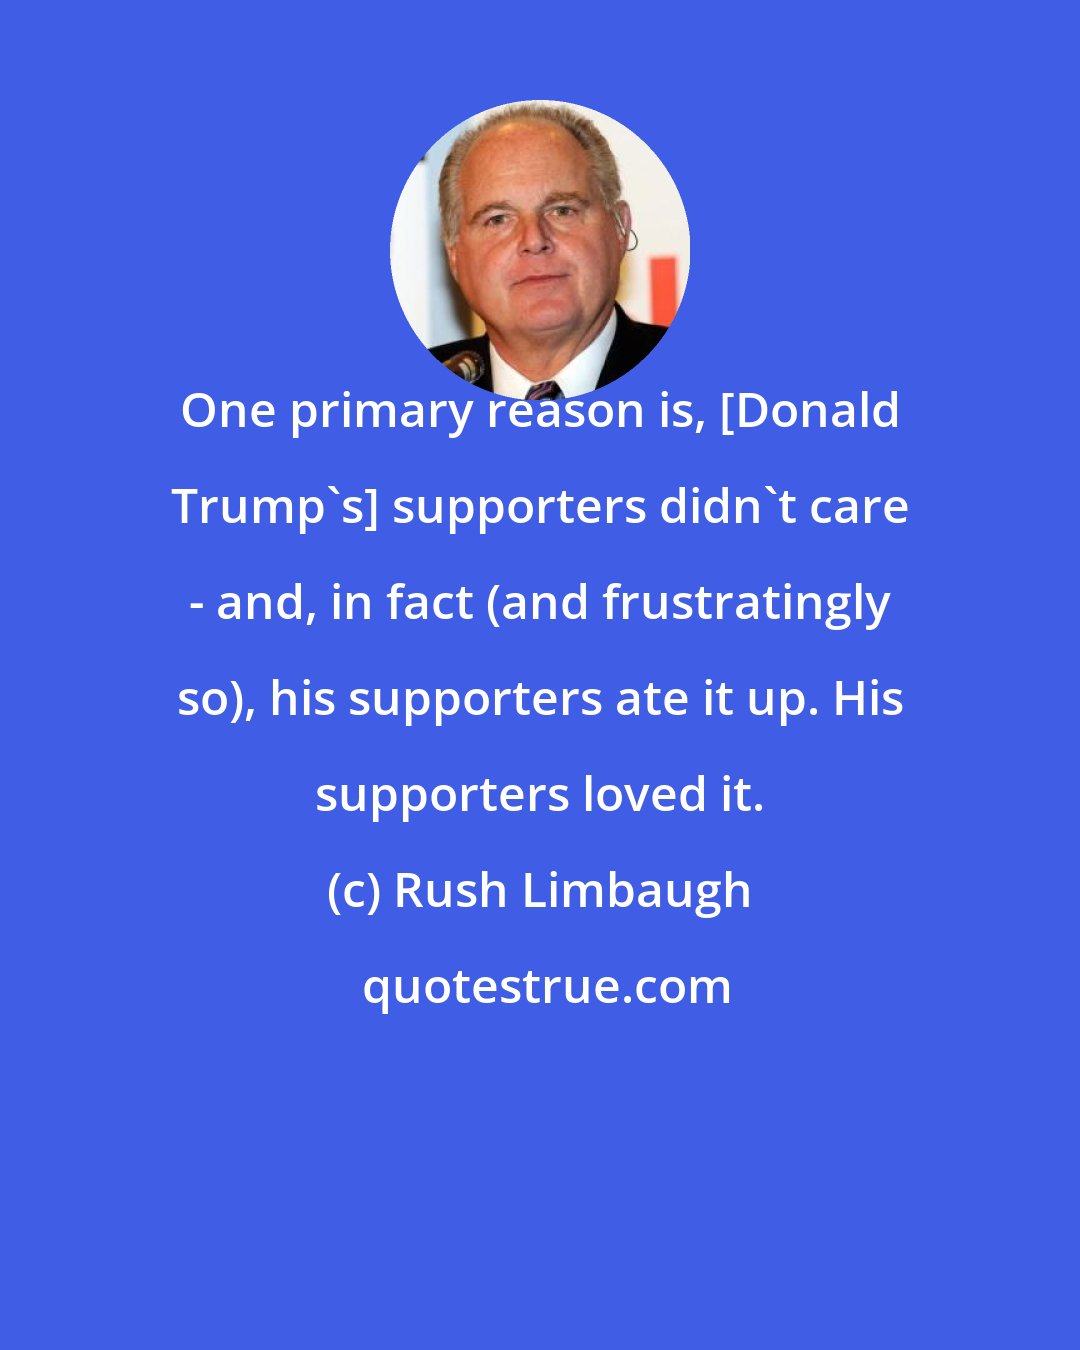 Rush Limbaugh: One primary reason is, [Donald Trump's] supporters didn't care - and, in fact (and frustratingly so), his supporters ate it up. His supporters loved it.